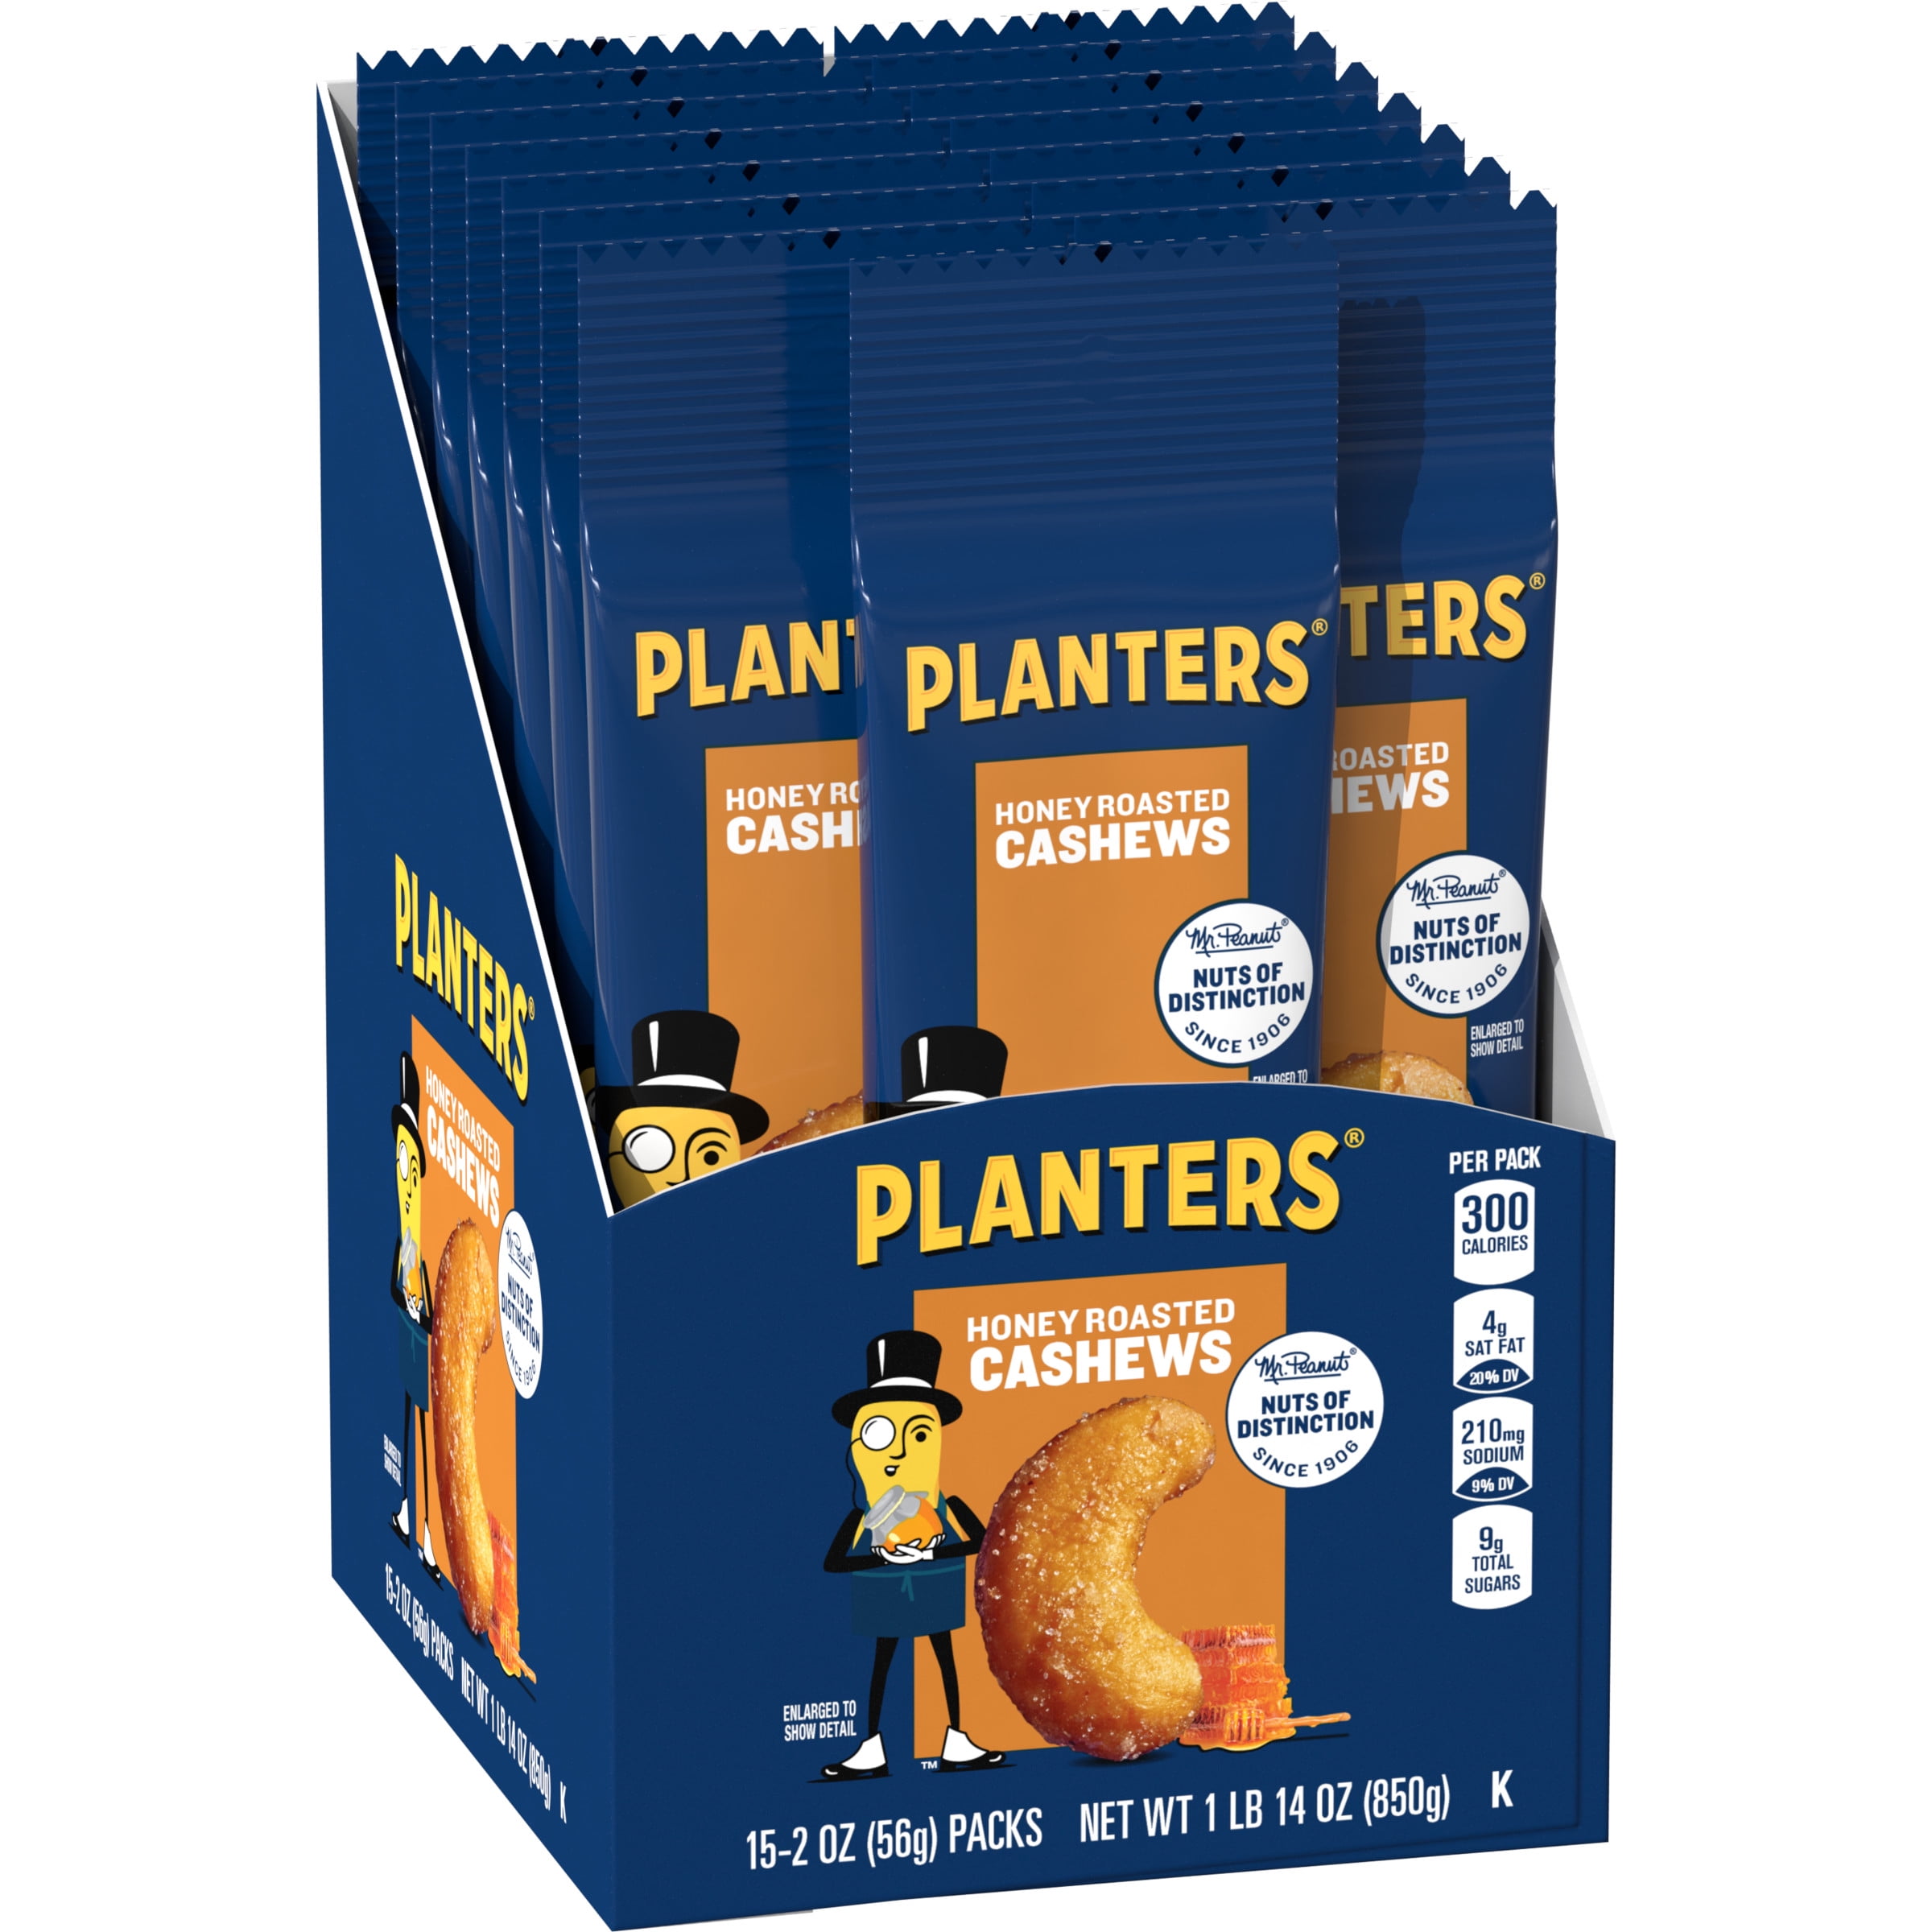 PLANTERS® A1 Sauce Flavored Roasted Deluxe Mixed Nuts 2.25 oz packet -  PLANTERS® Brand